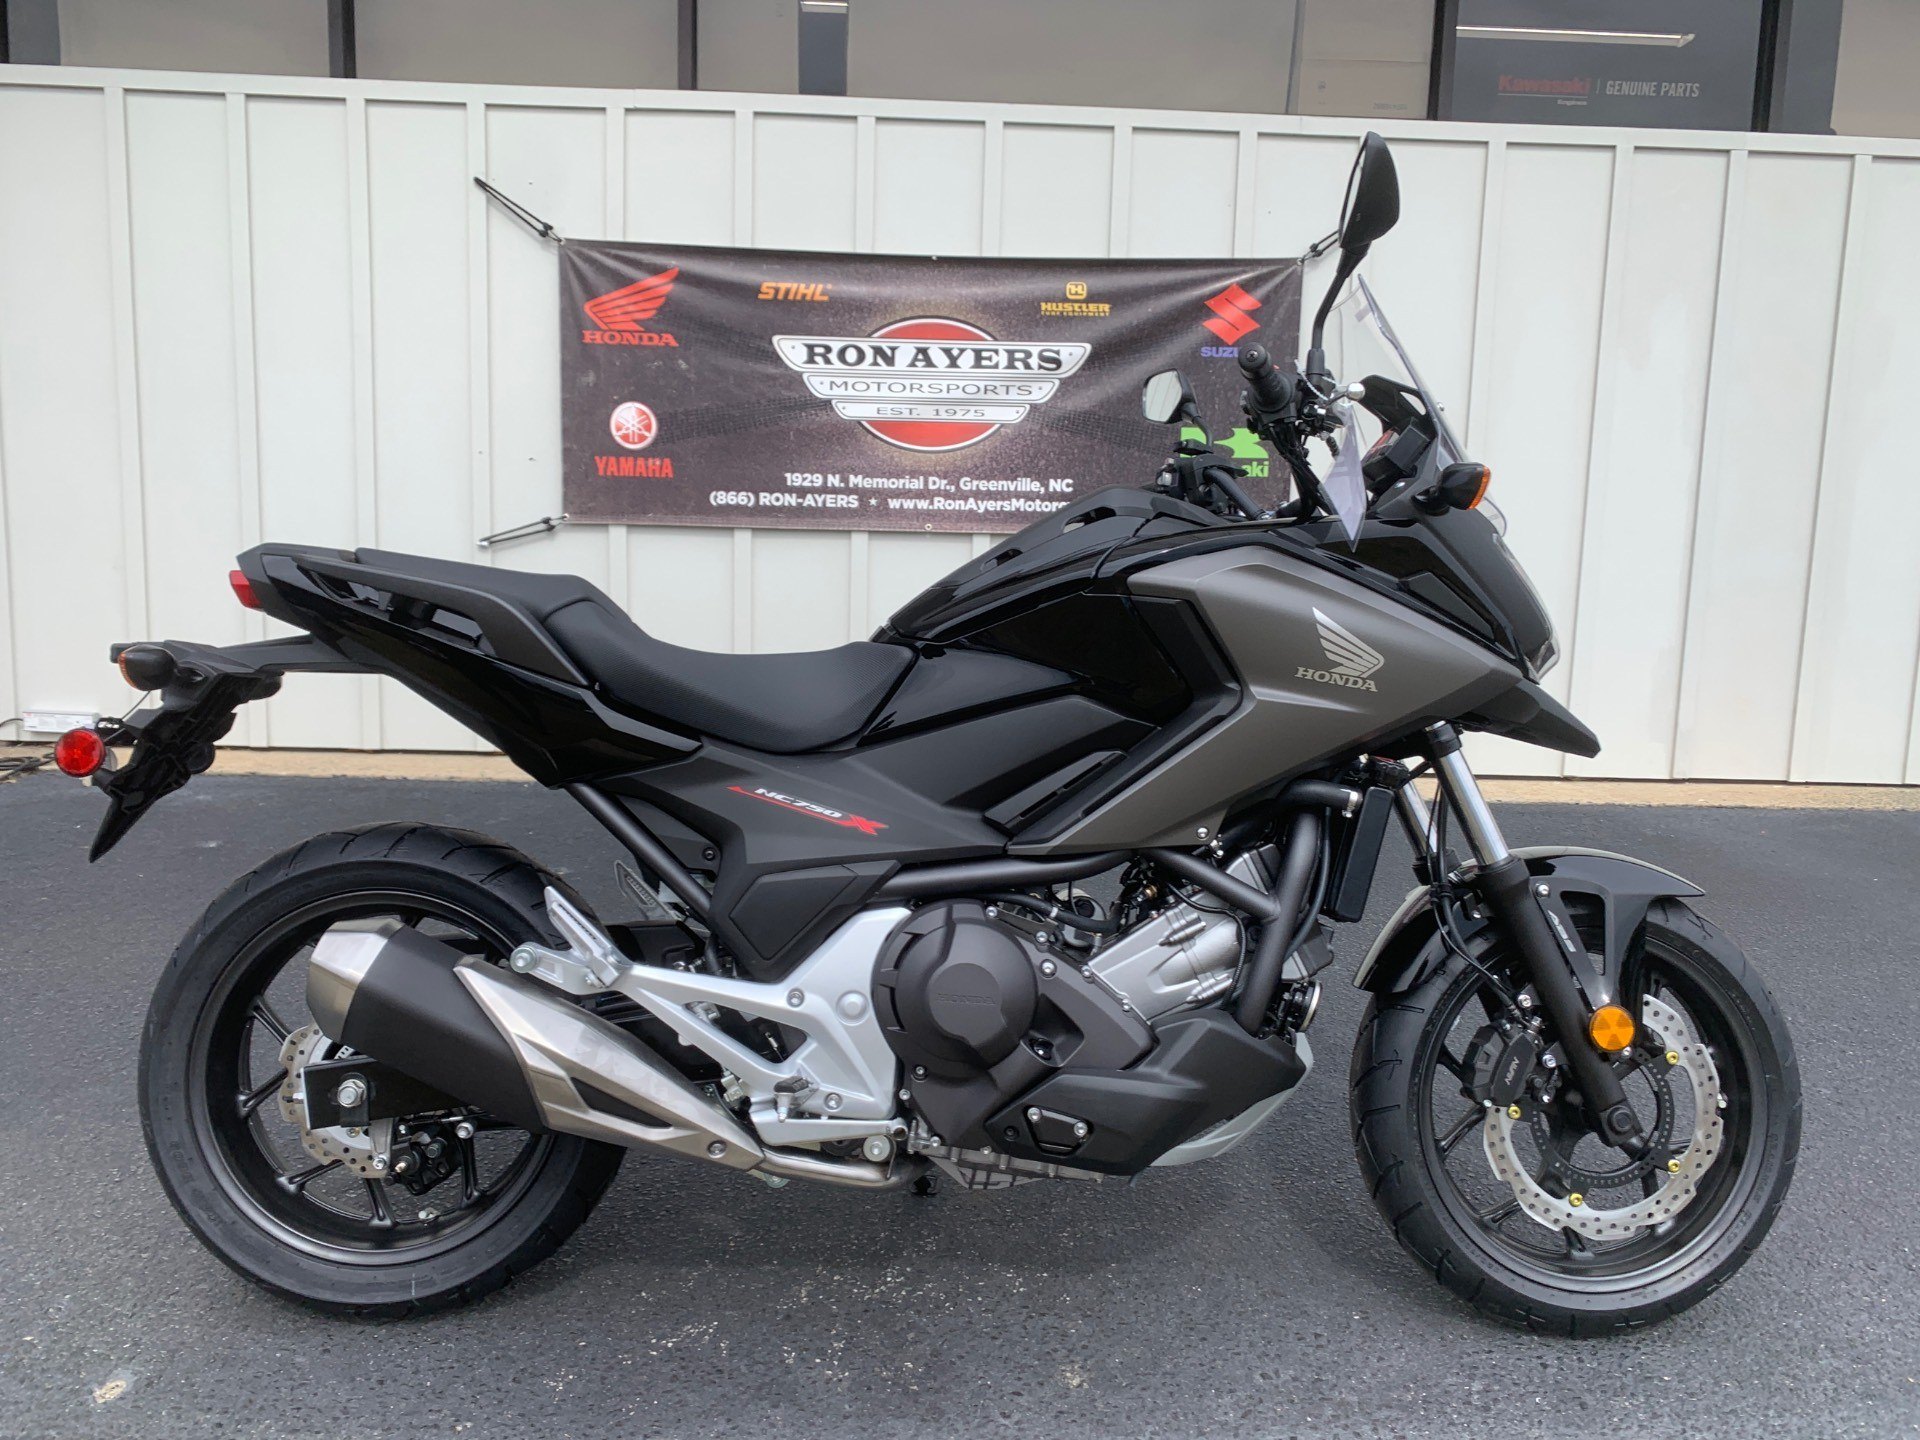 New 2020 Honda NC750X DCT ABS Motorcycles in Greenville, NC | Stock